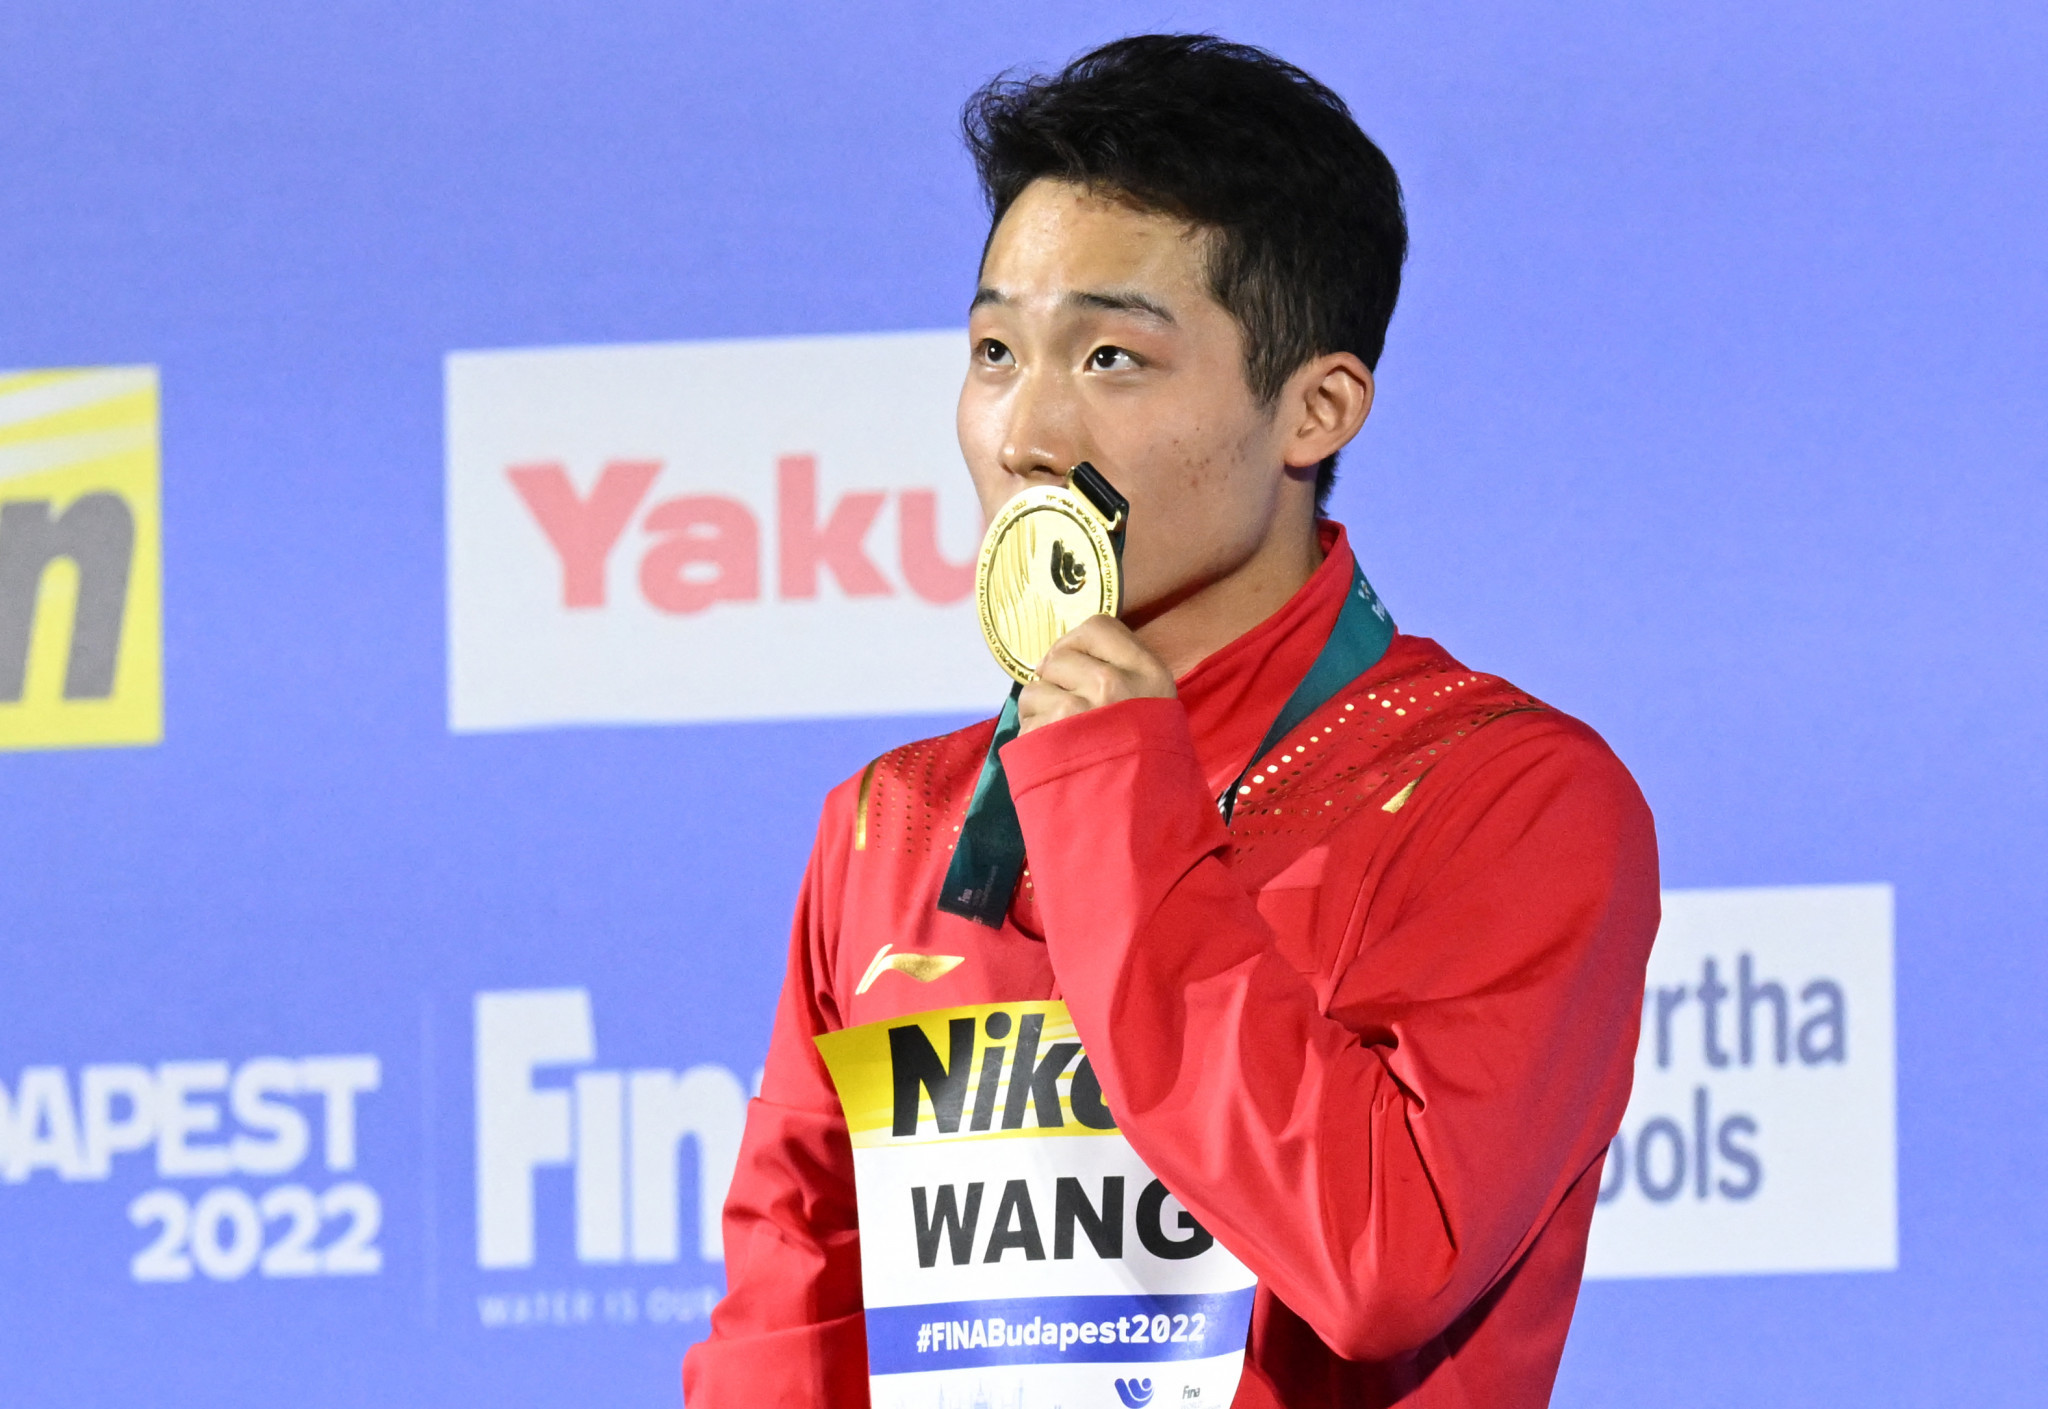 Olympic silver medallist Wang Zongyuan of China upgraded to gold at the World Championships in the men's 3m springboard final ©Getty Images